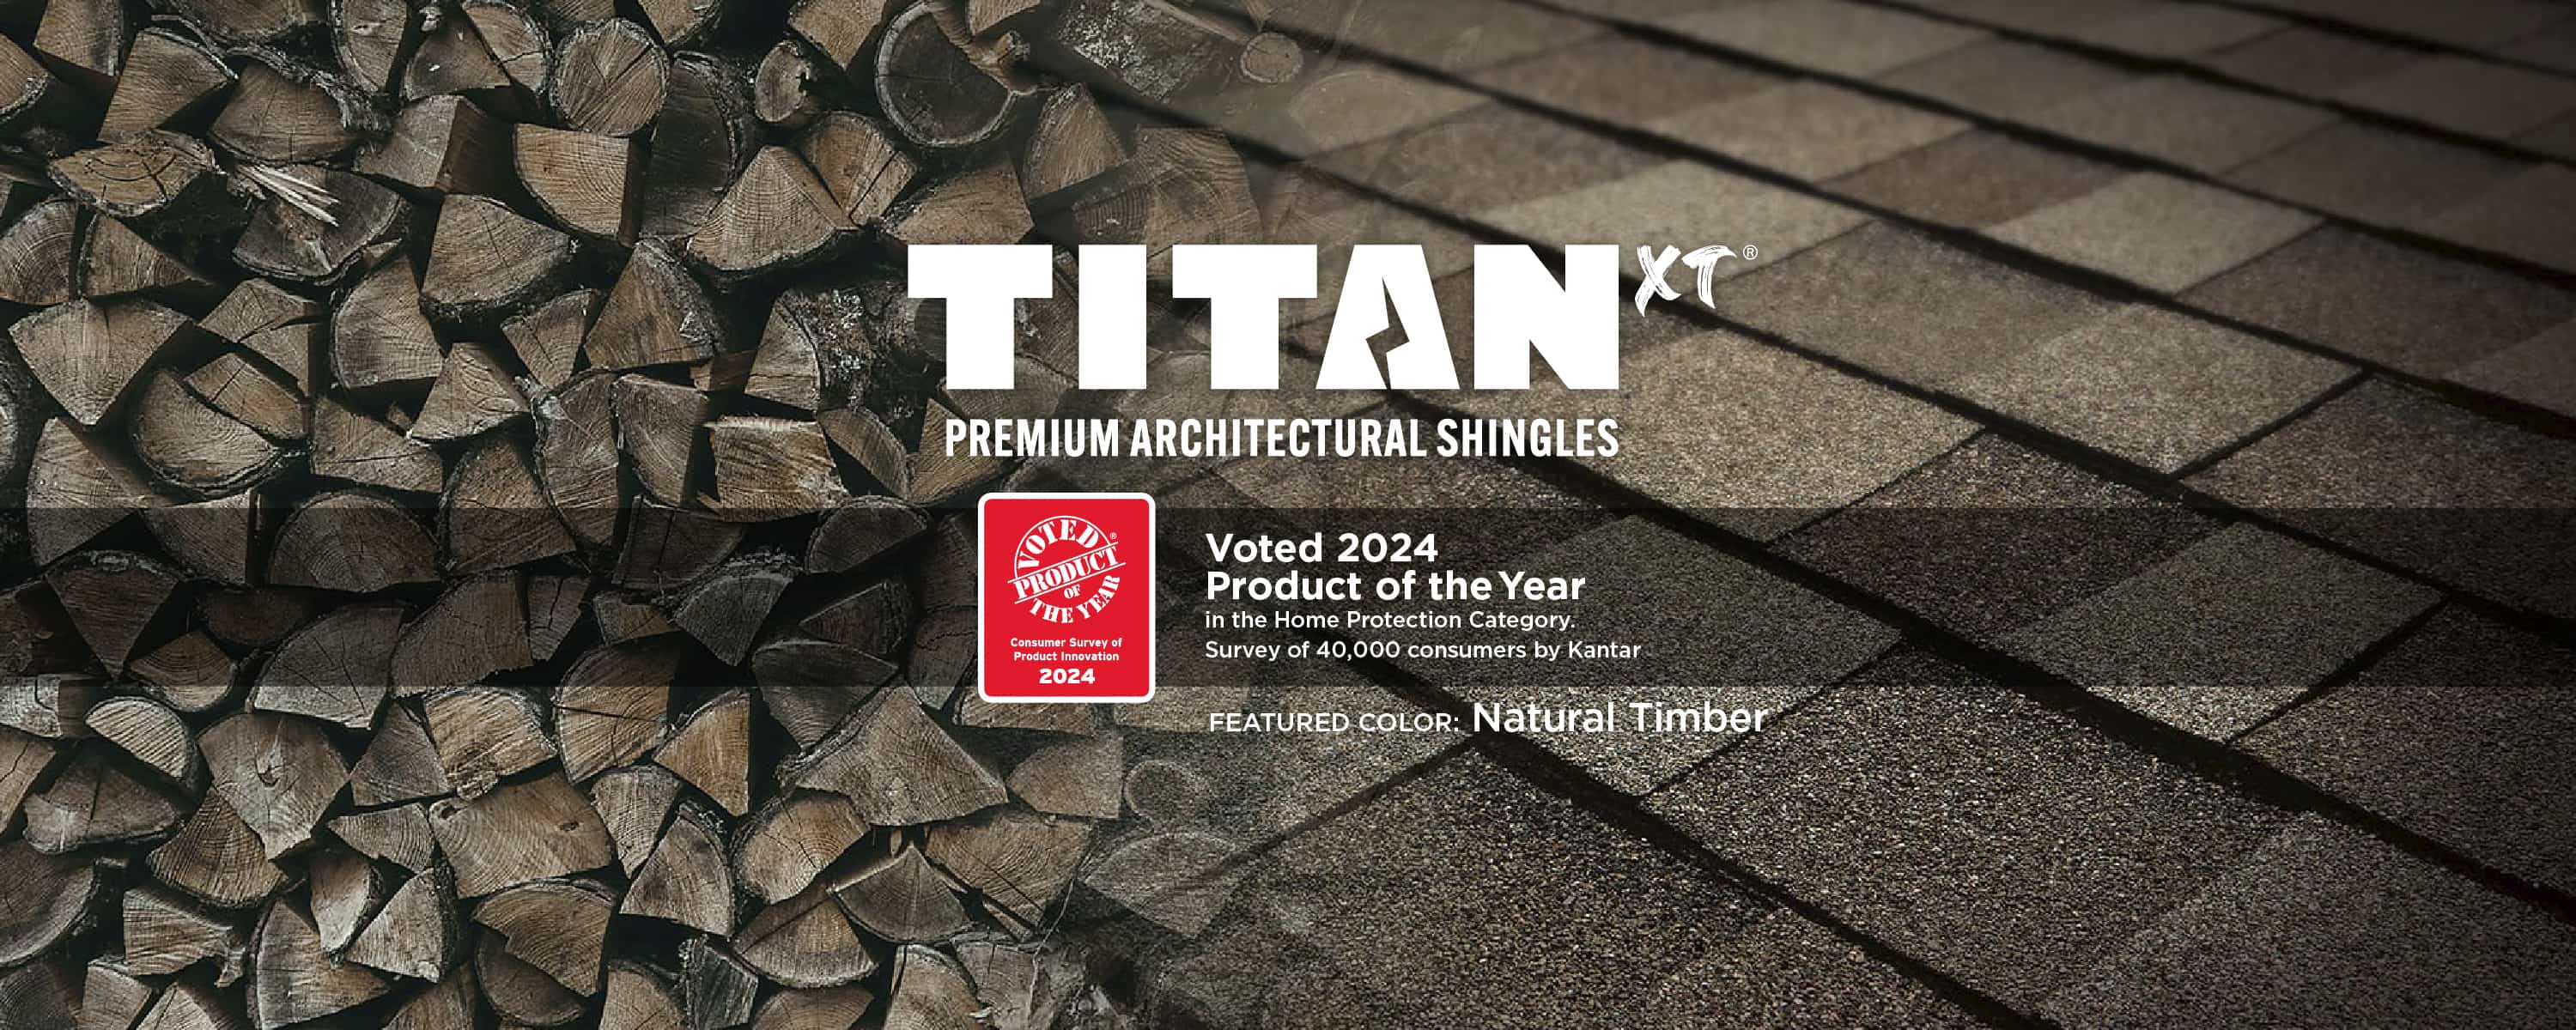 Titan XT 2024 Product of the Year - Natural Timber